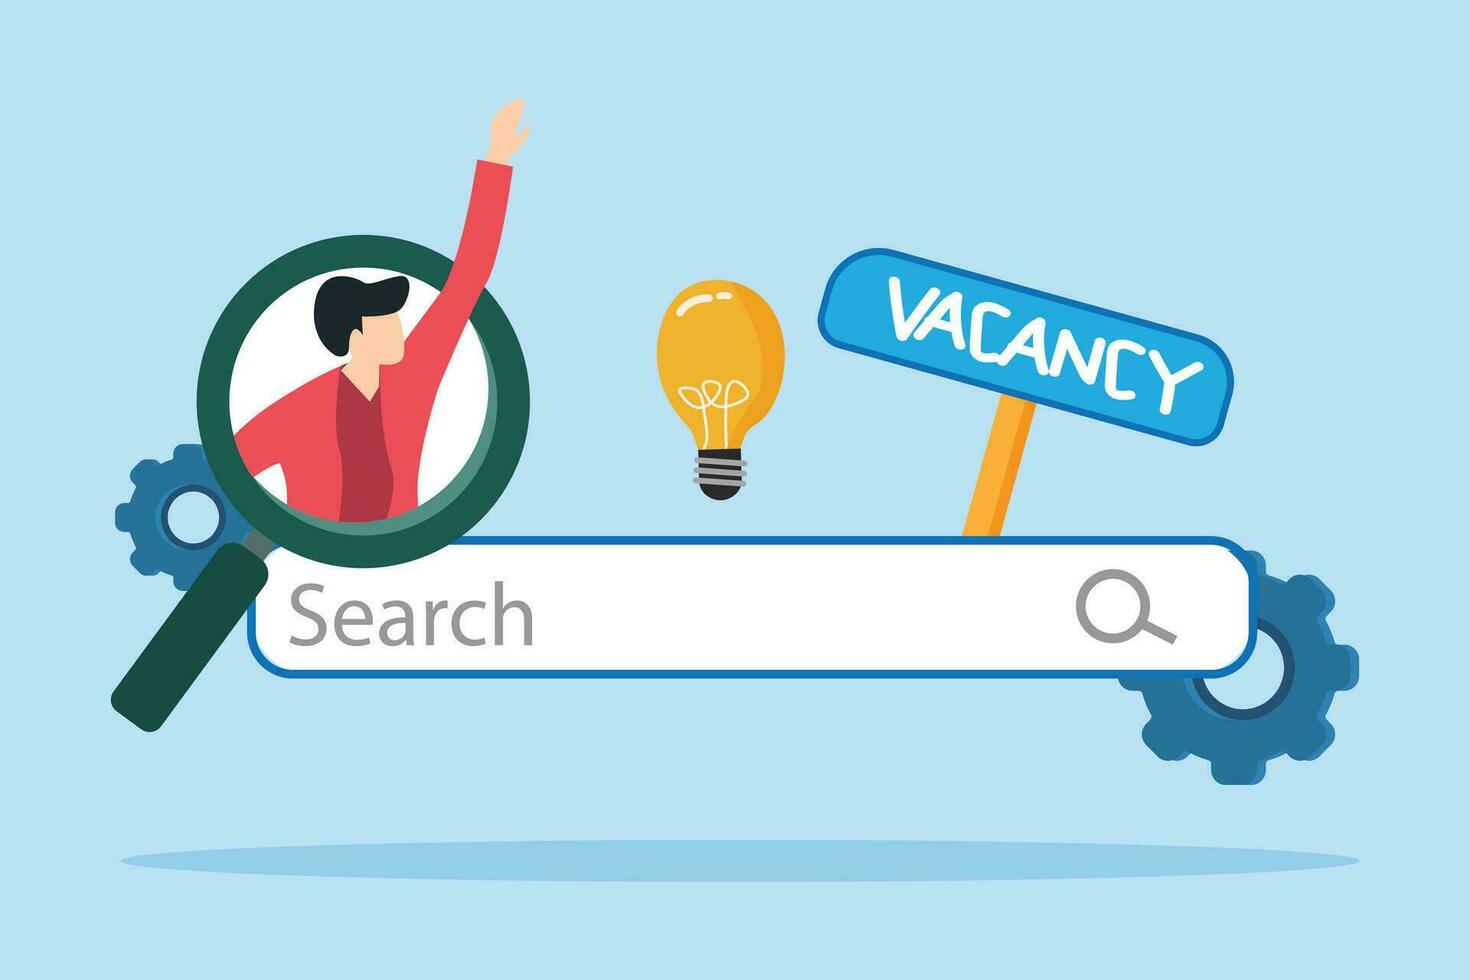 open vacancies, job search. human resources concept looking for candidates vector